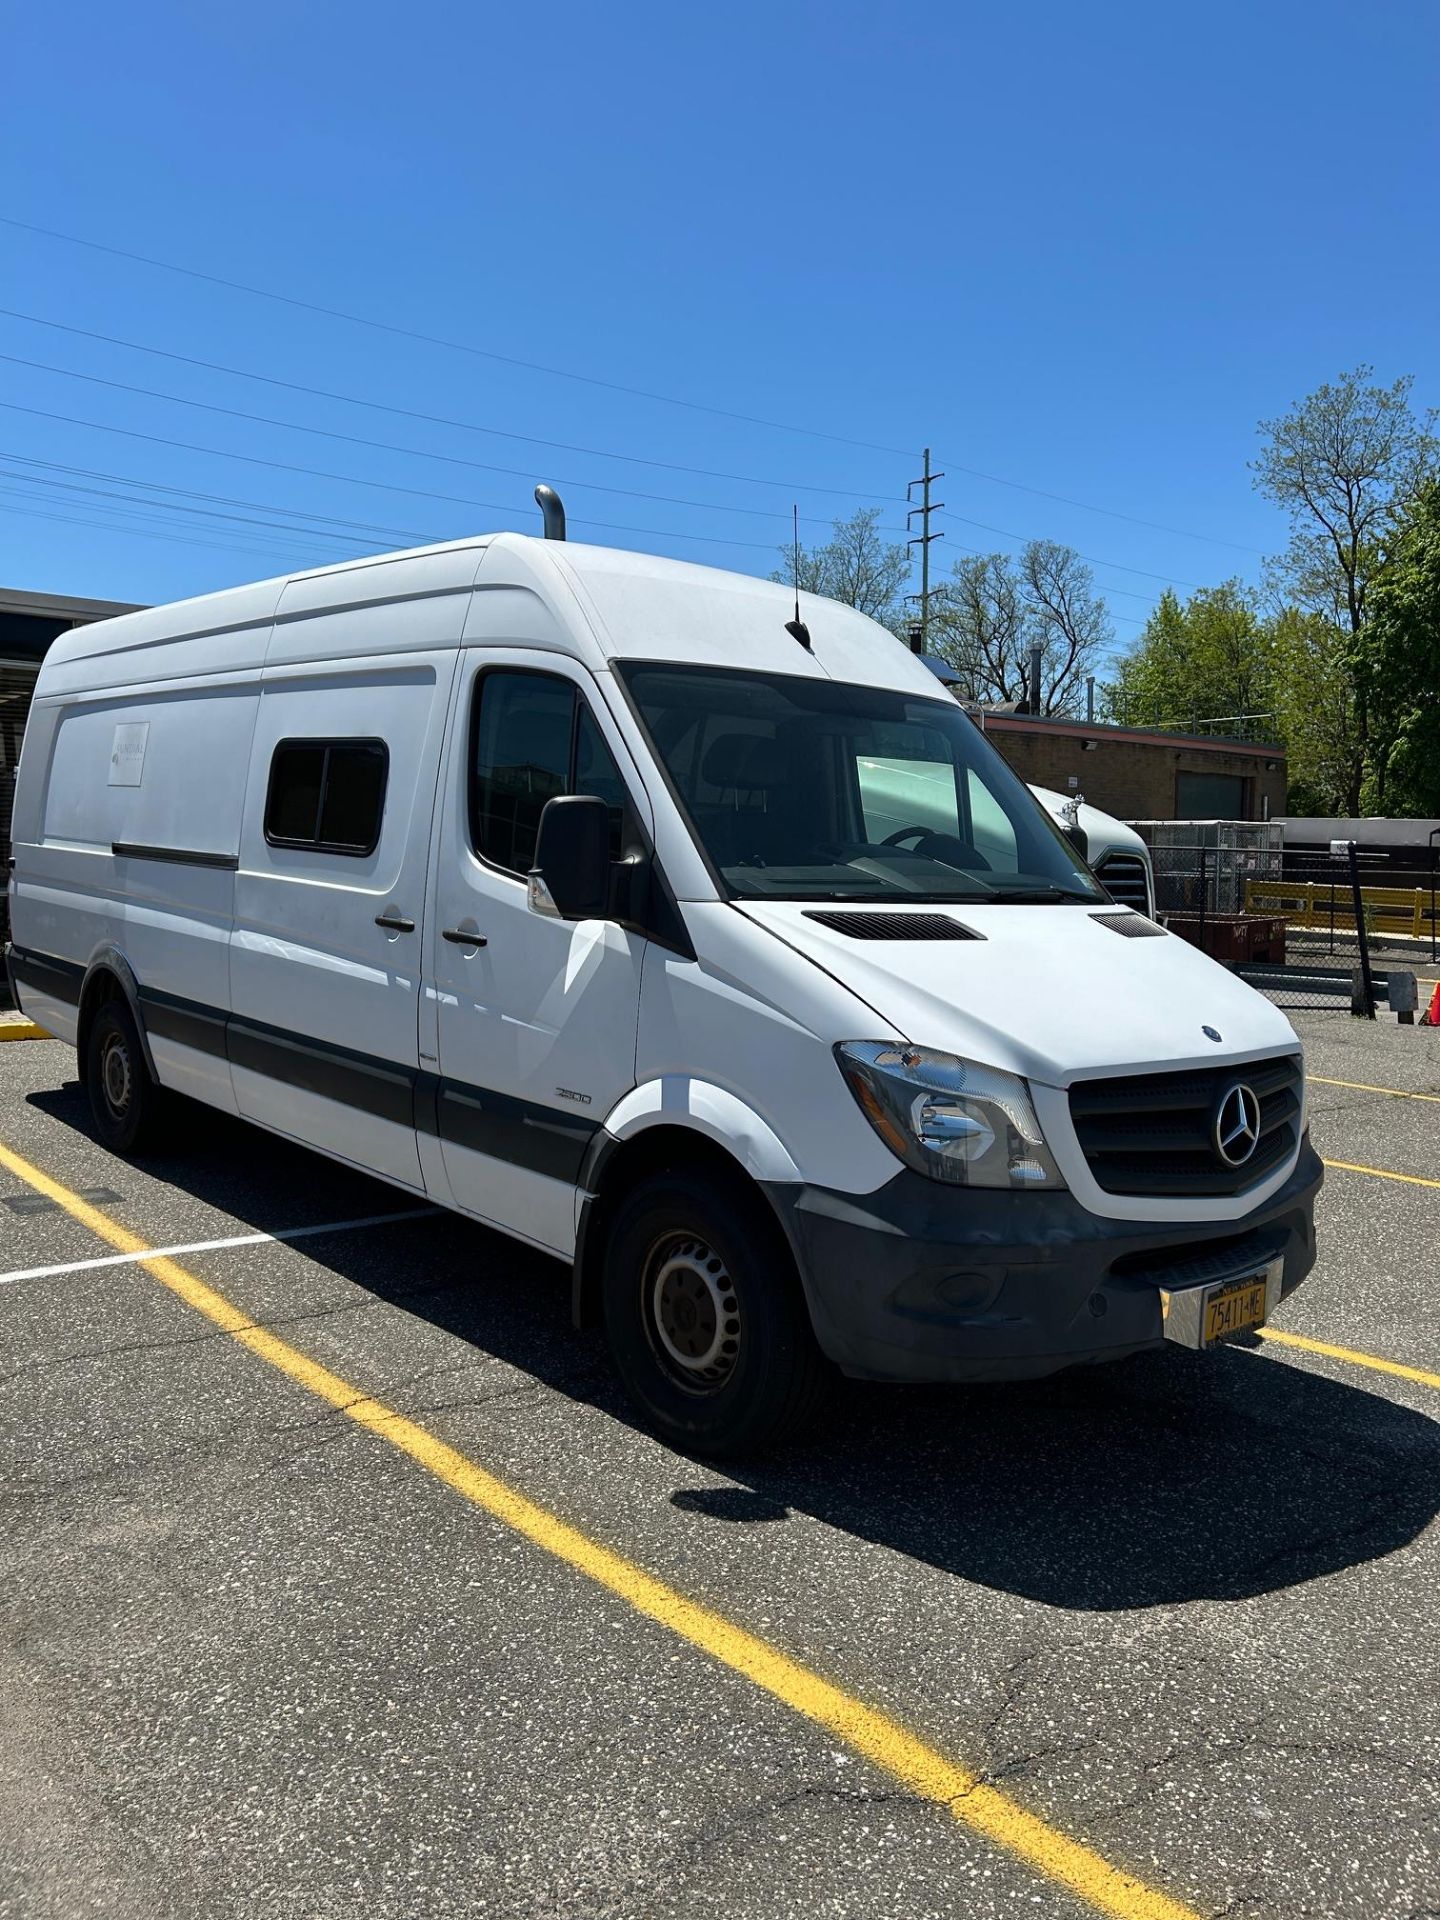 2014 Mercedes Diesel Cargo Van, Automatic Transmission, Approx. 48899 Miles.